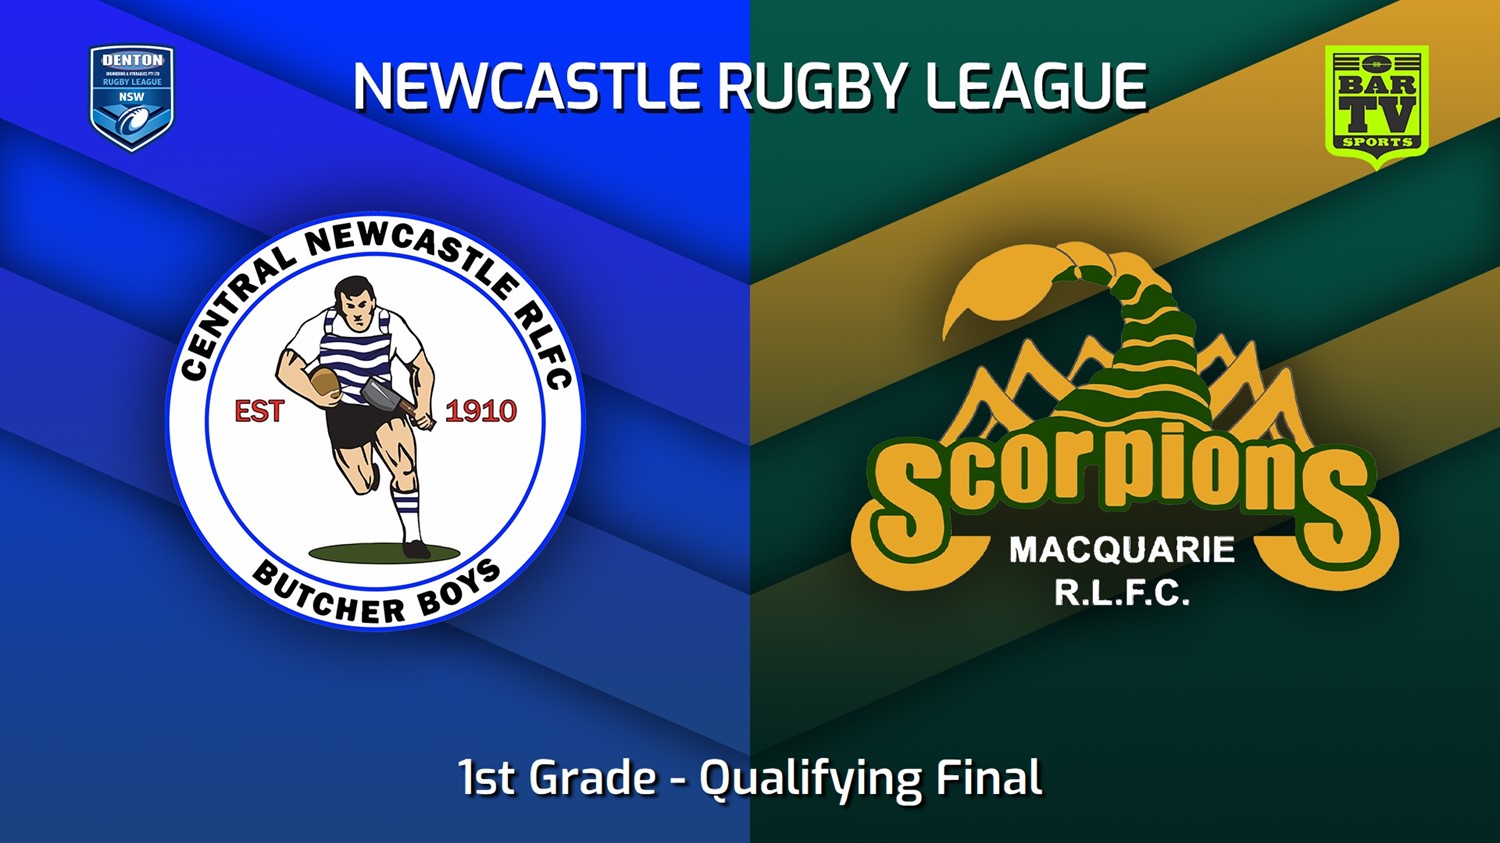 220820-Newcastle Qualifying Final - 1st Grade - Central Newcastle v Macquarie Scorpions Minigame Slate Image